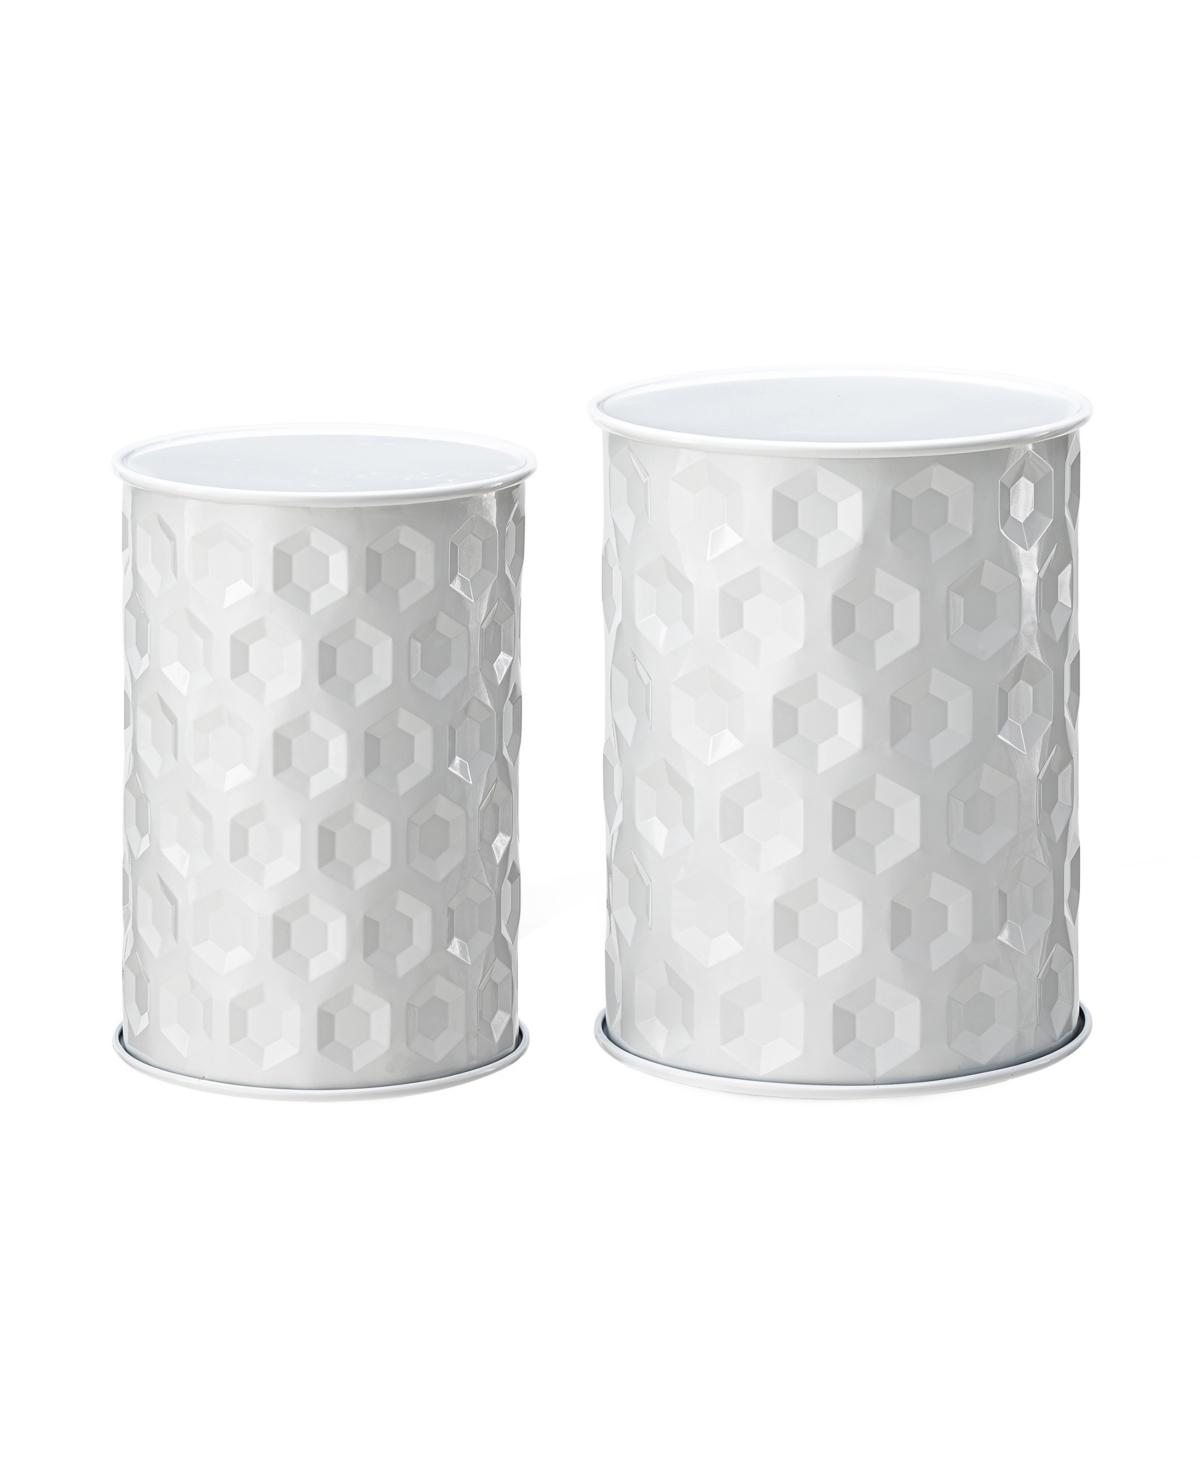 Set of 2 Multi-Functional Honeycomb White Metal Garden Stool or Planter Stand - White